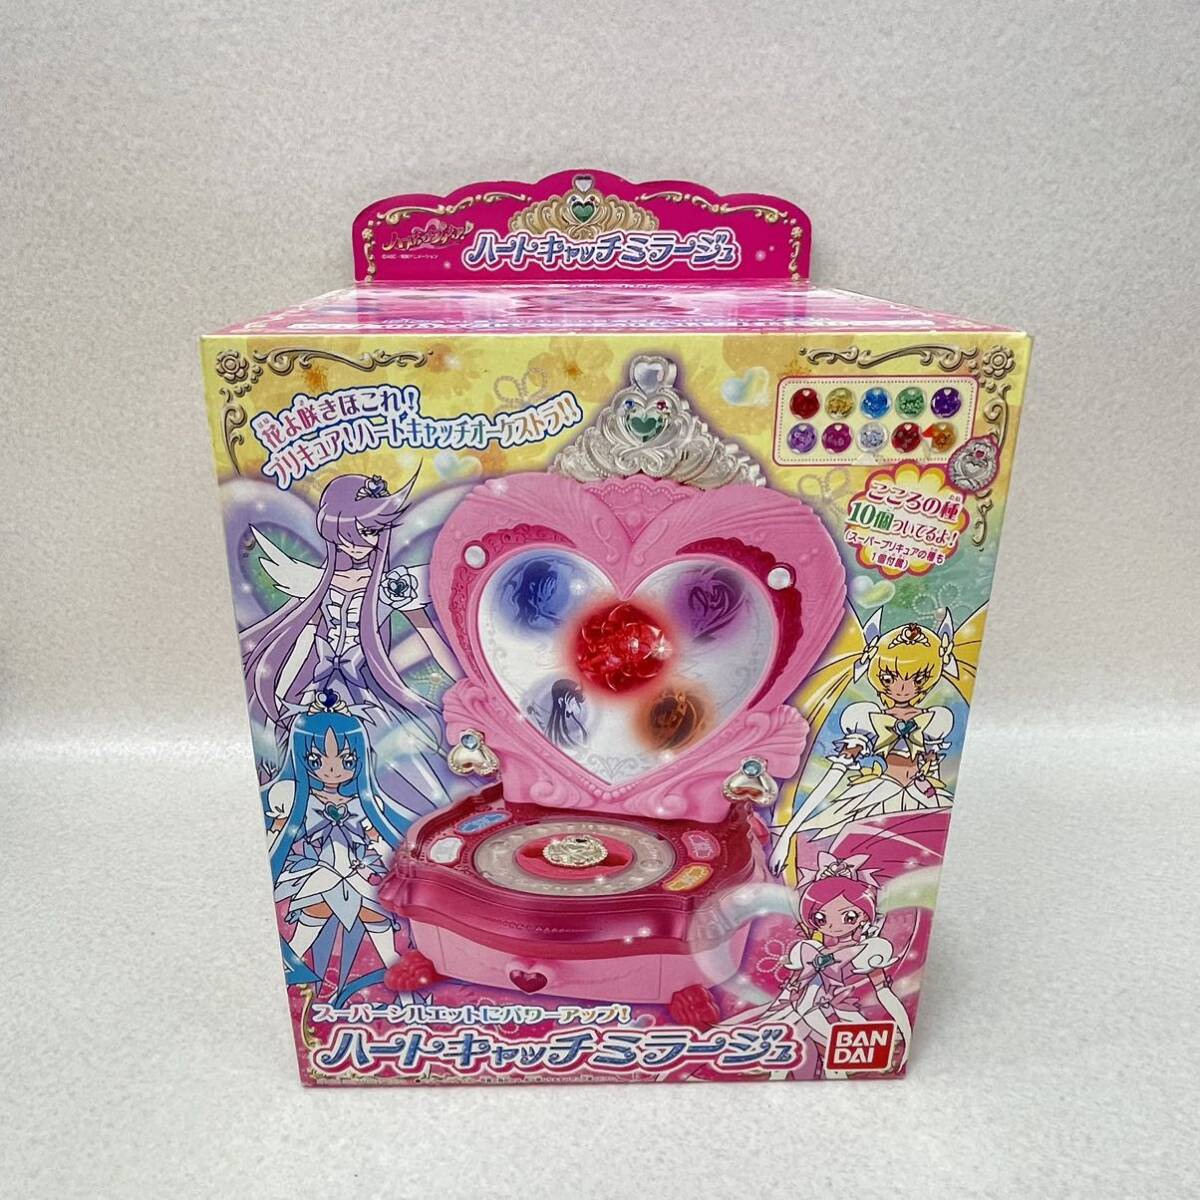 H6064* secondhand goods * electrification has confirmed * Heart catch Precure Heart catch Mirage Bandai including in a package un- possible 